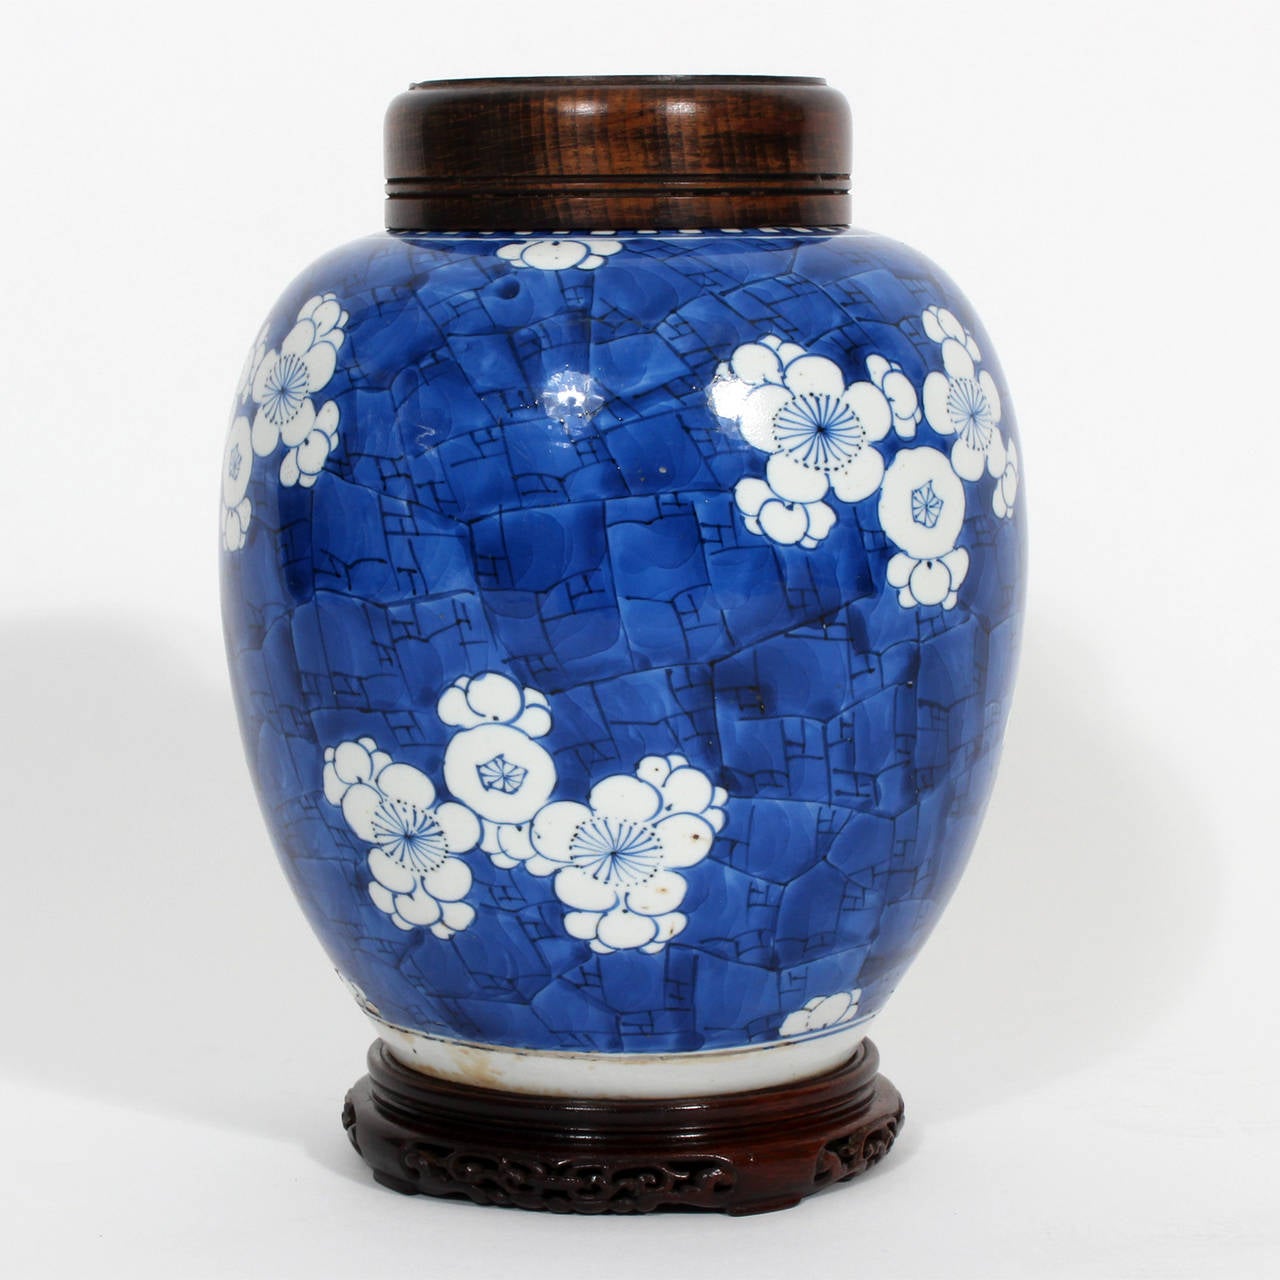 Striking, deep blue and white Chinese Export ginger jar with hardwood lid and carved base. Painted in a white cherry blossom motif. Bold and beautiful. 
Late 19th or early 20th century Old paper label on the bottom.

 